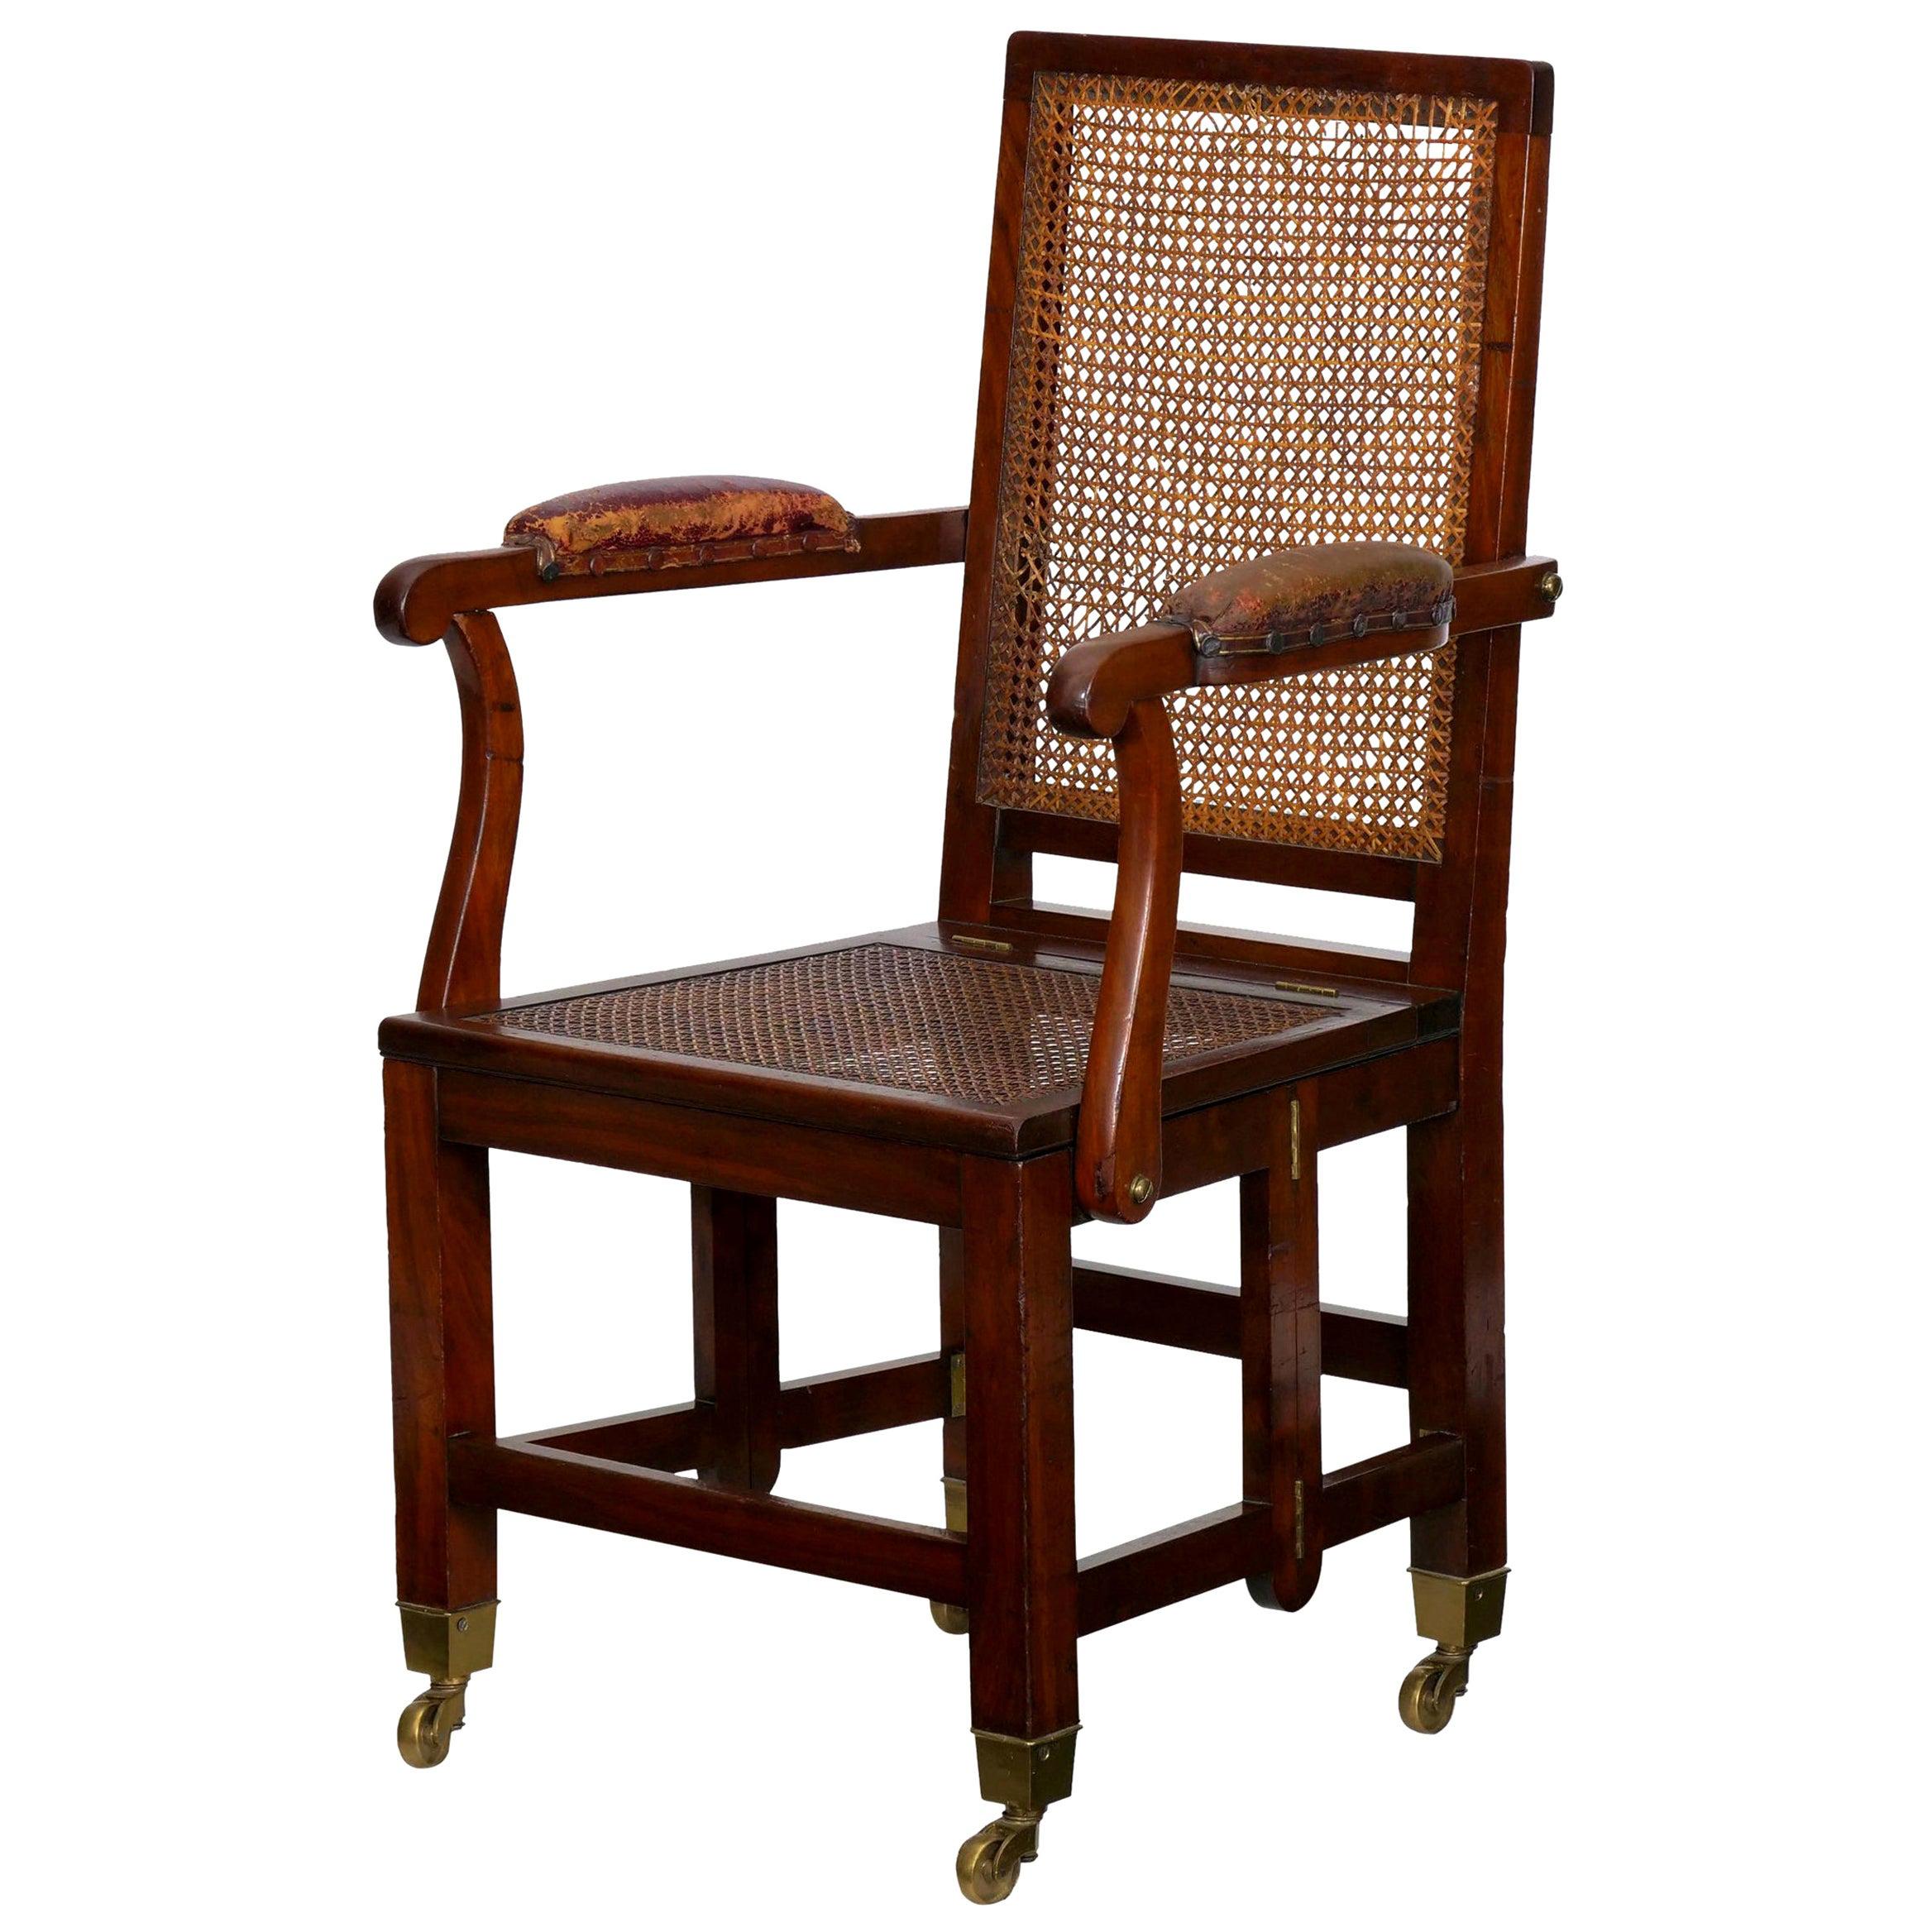 British Campaign Mahogany “Knock-Down" Antique Armchair Johnstone & Jeanes For Sale